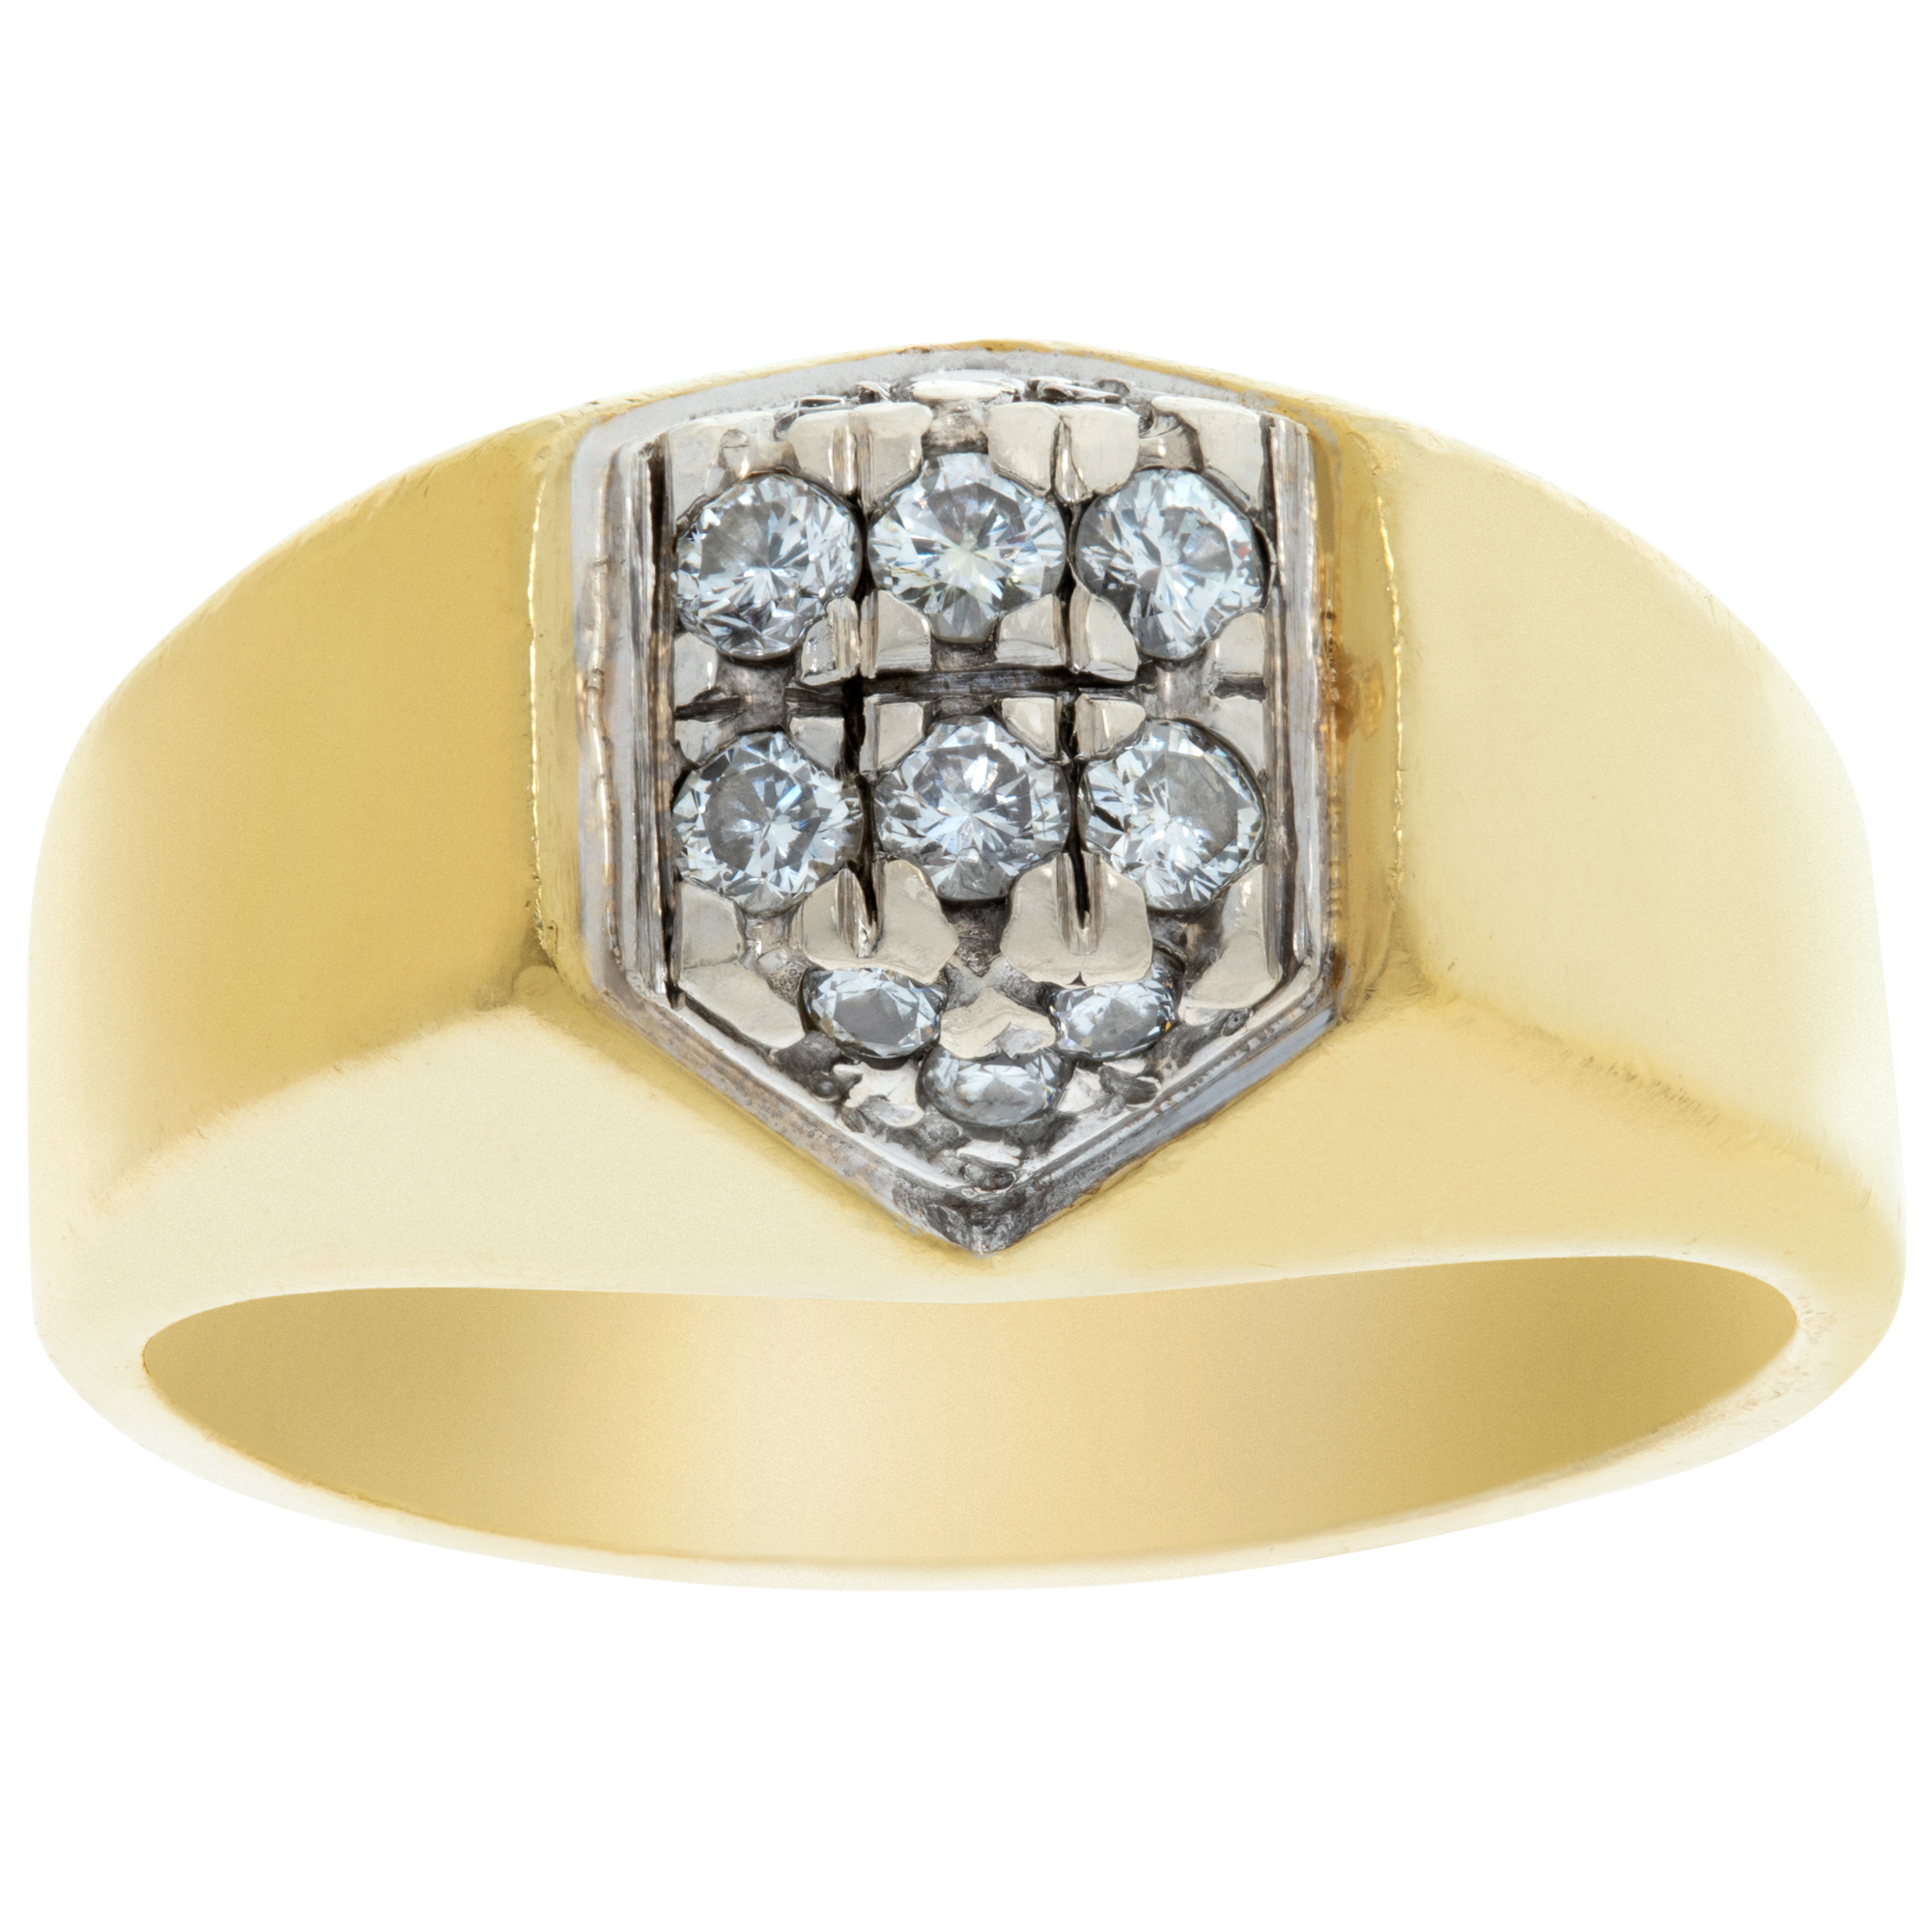 Mens 18k yellow gold diamond ring with approximately 0.18 carat in diamonds